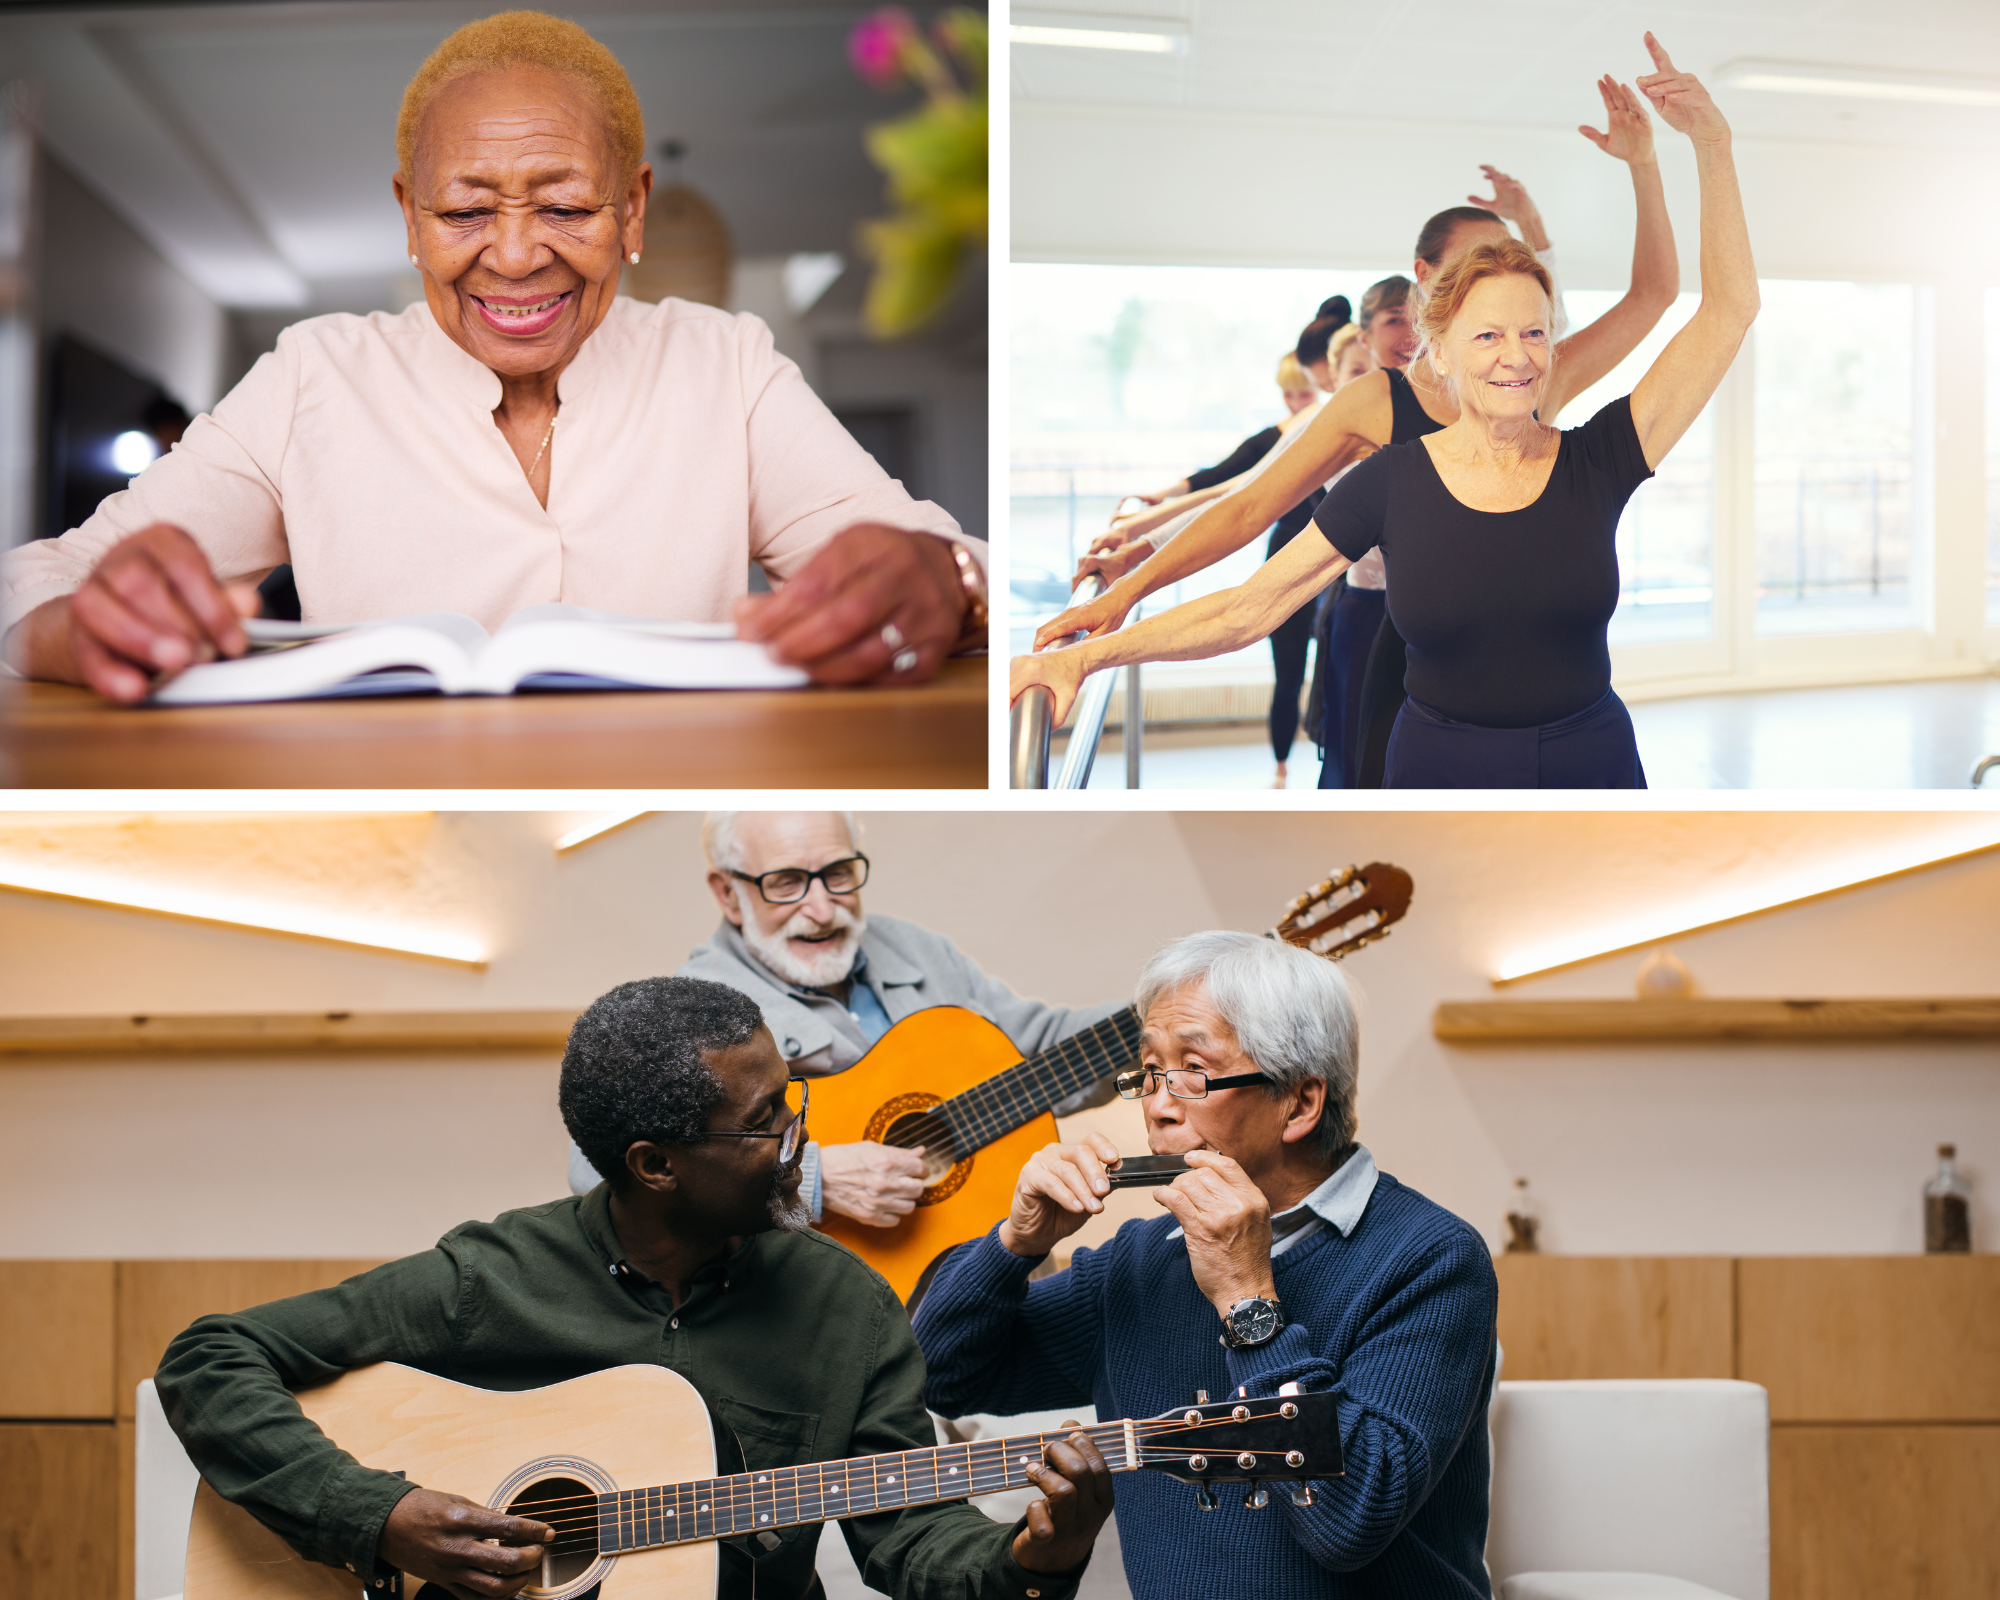 Intellectual Activities for Seniors to Keep their Brains Stimulated